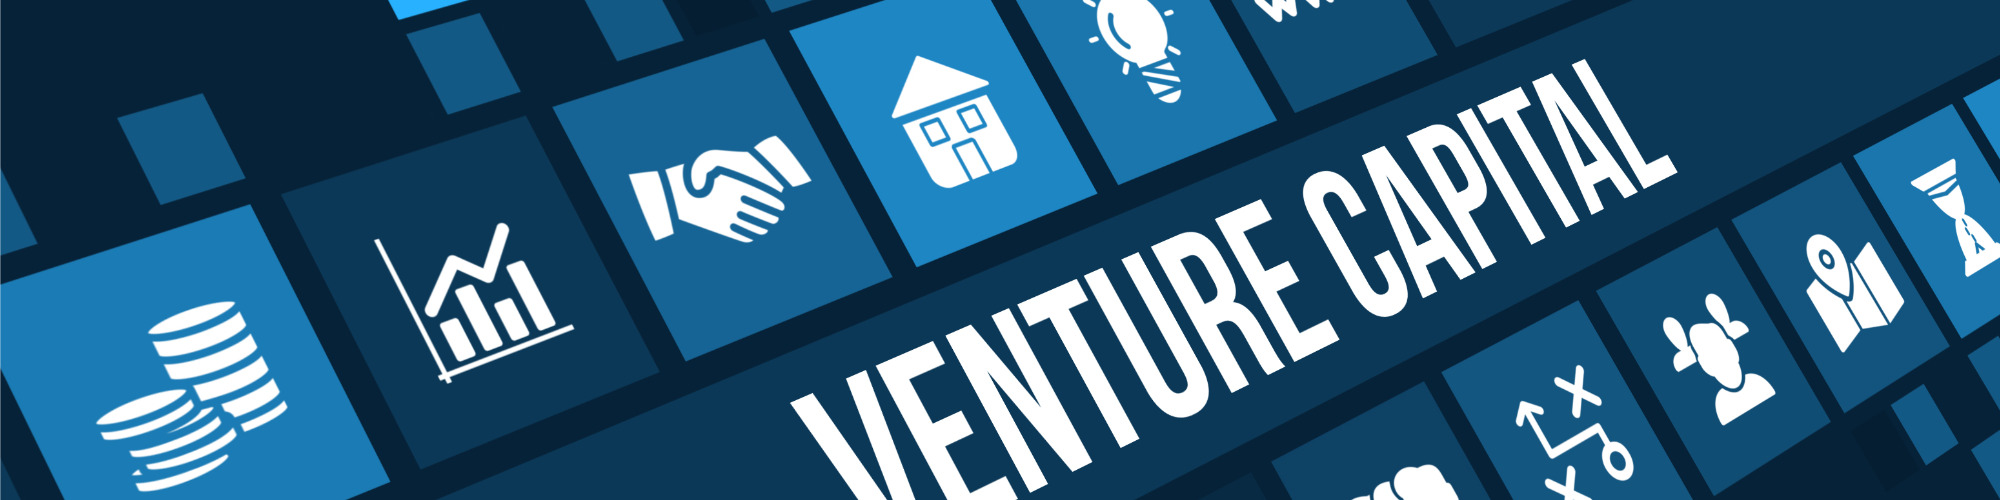 Venture Capital Investment - Beyond the Basics - Live at Your Desk